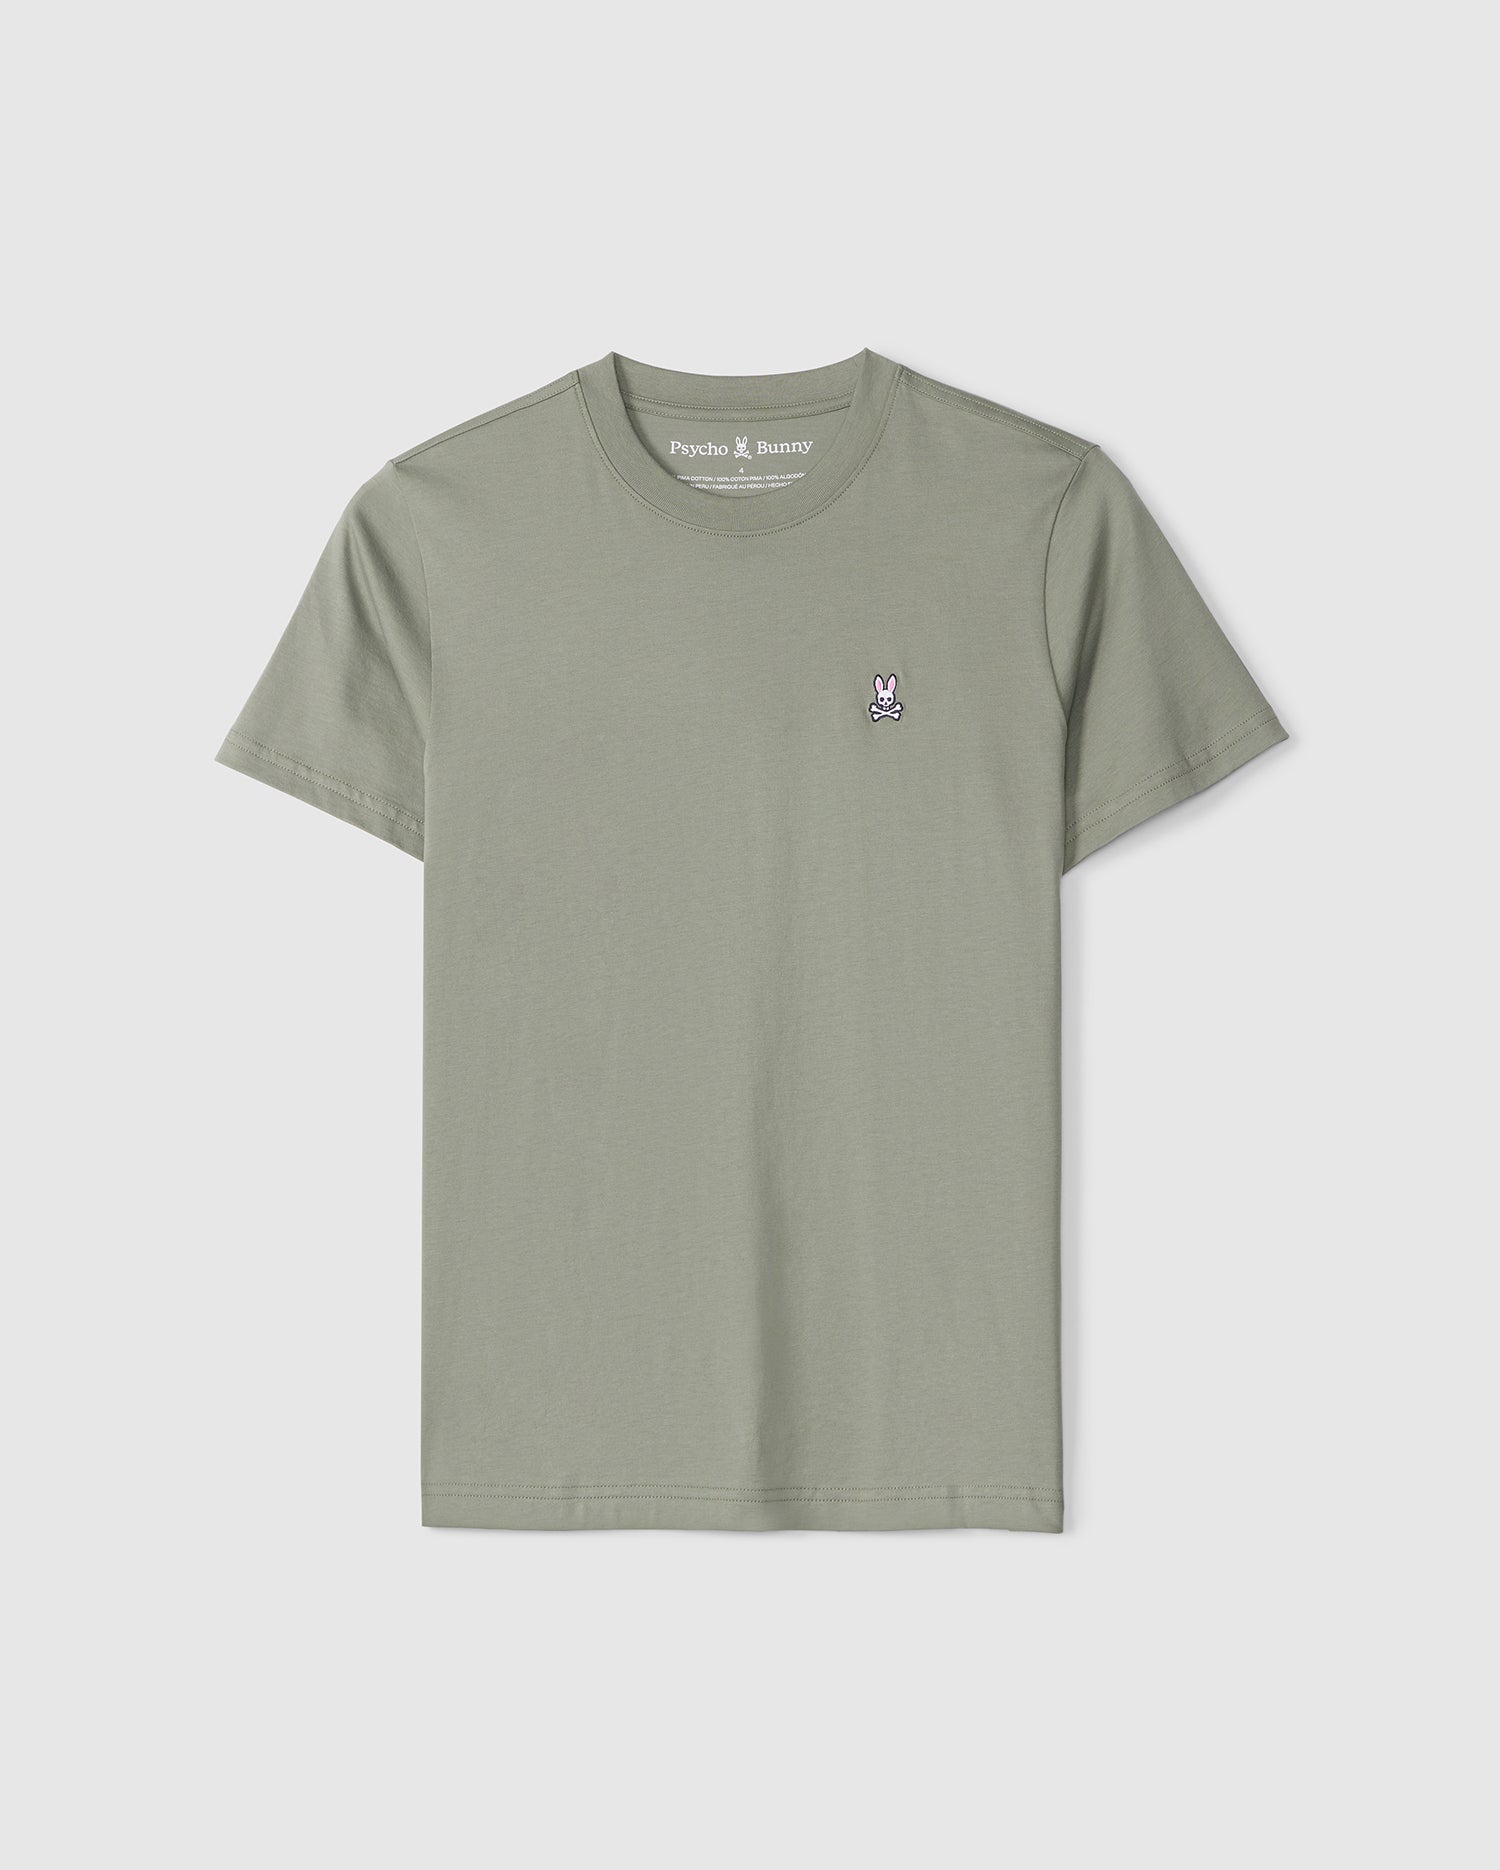 A plain olive green Psycho Bunny Men's Classic crewneck tee displayed on a white background, featuring a small white cartoon-style bunny logo on the left chest area.